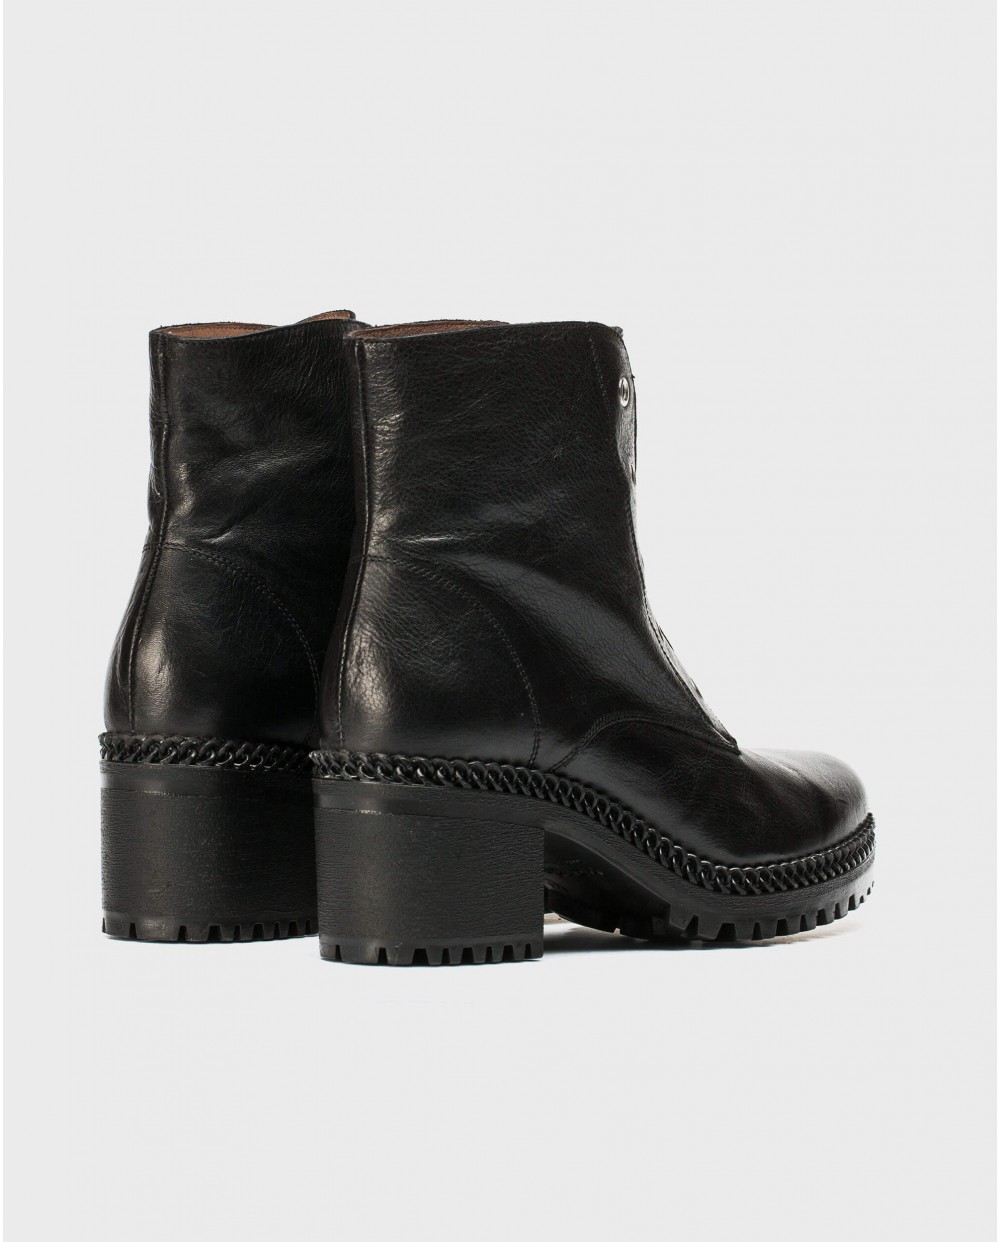 Wonders-Ankle Boots-Biker ankle boot with centre zip